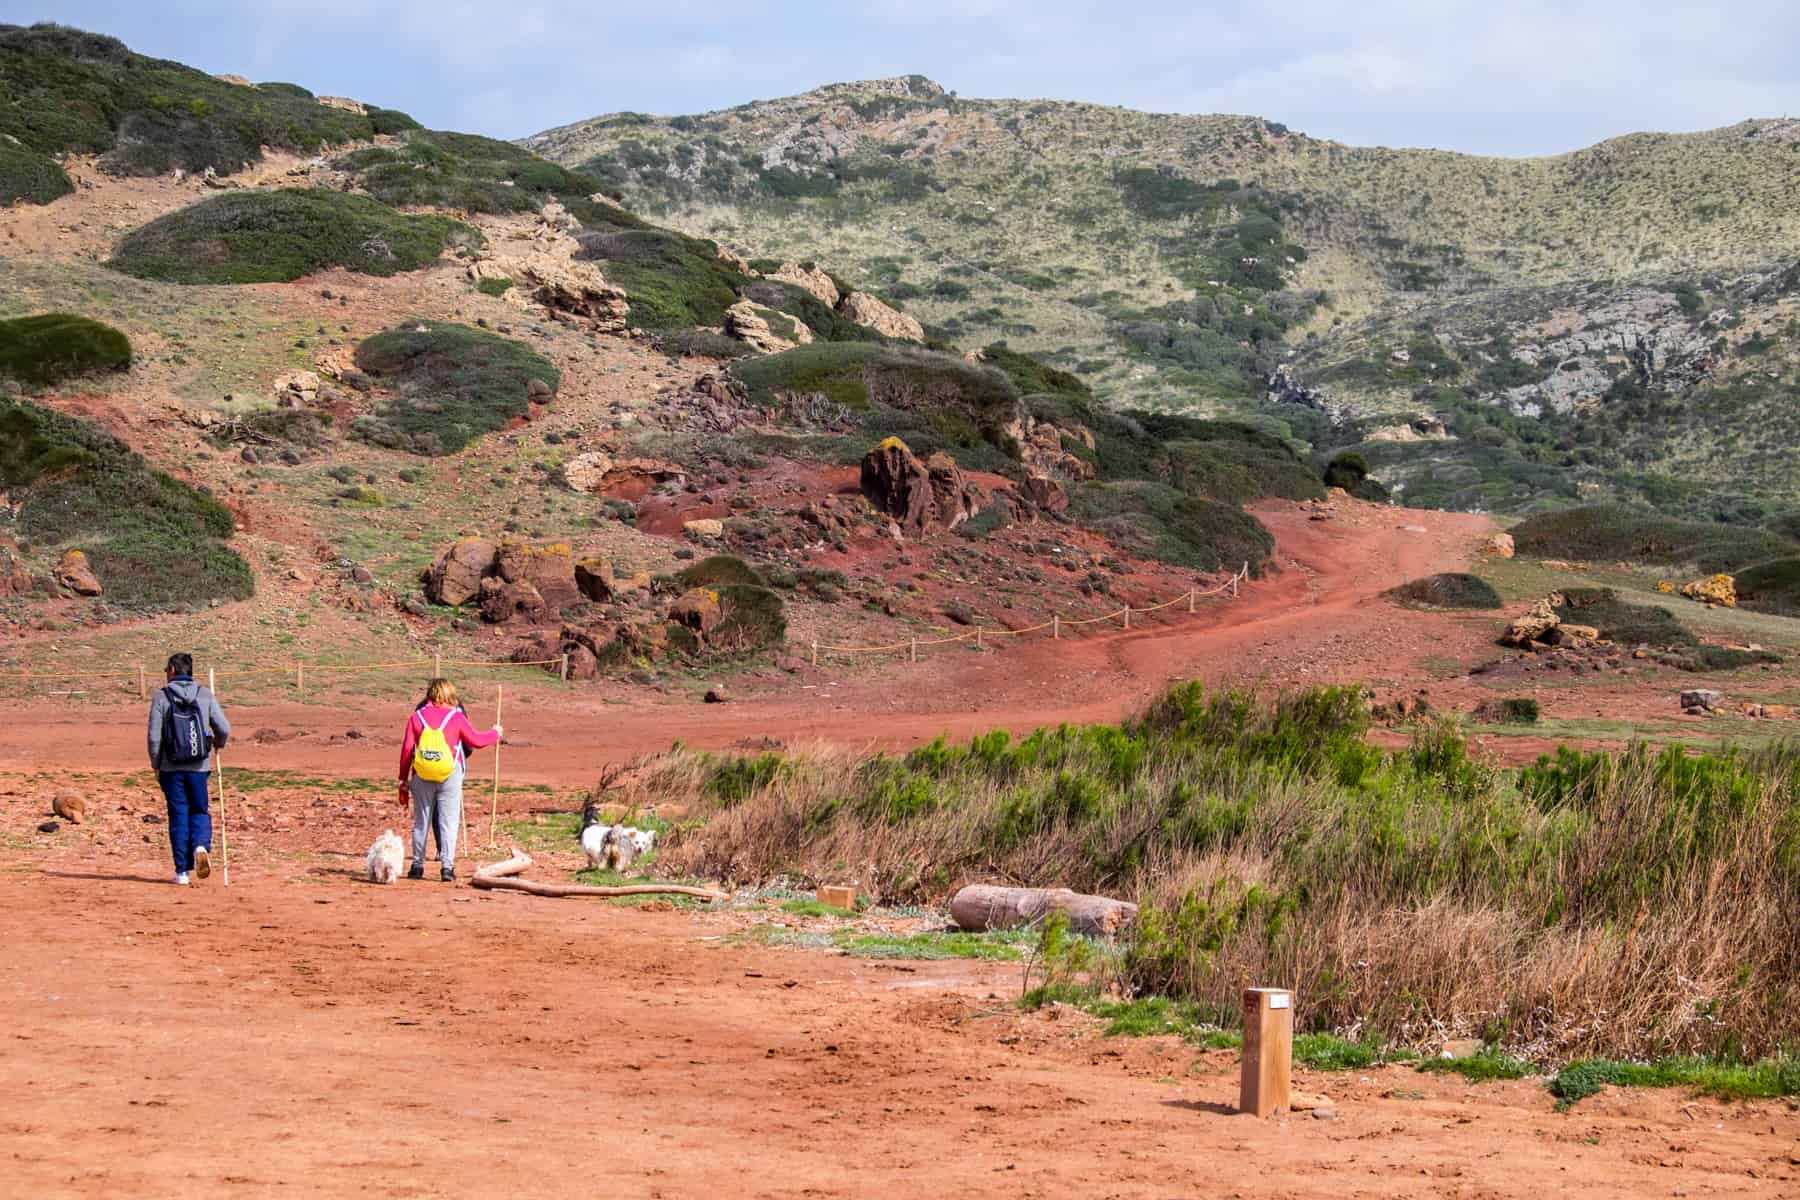 Two walkers with sticks and a dog walk on a sandy orange path towards a small hill and green hills - part of the Cami de Cavalls trail in Menorca. 